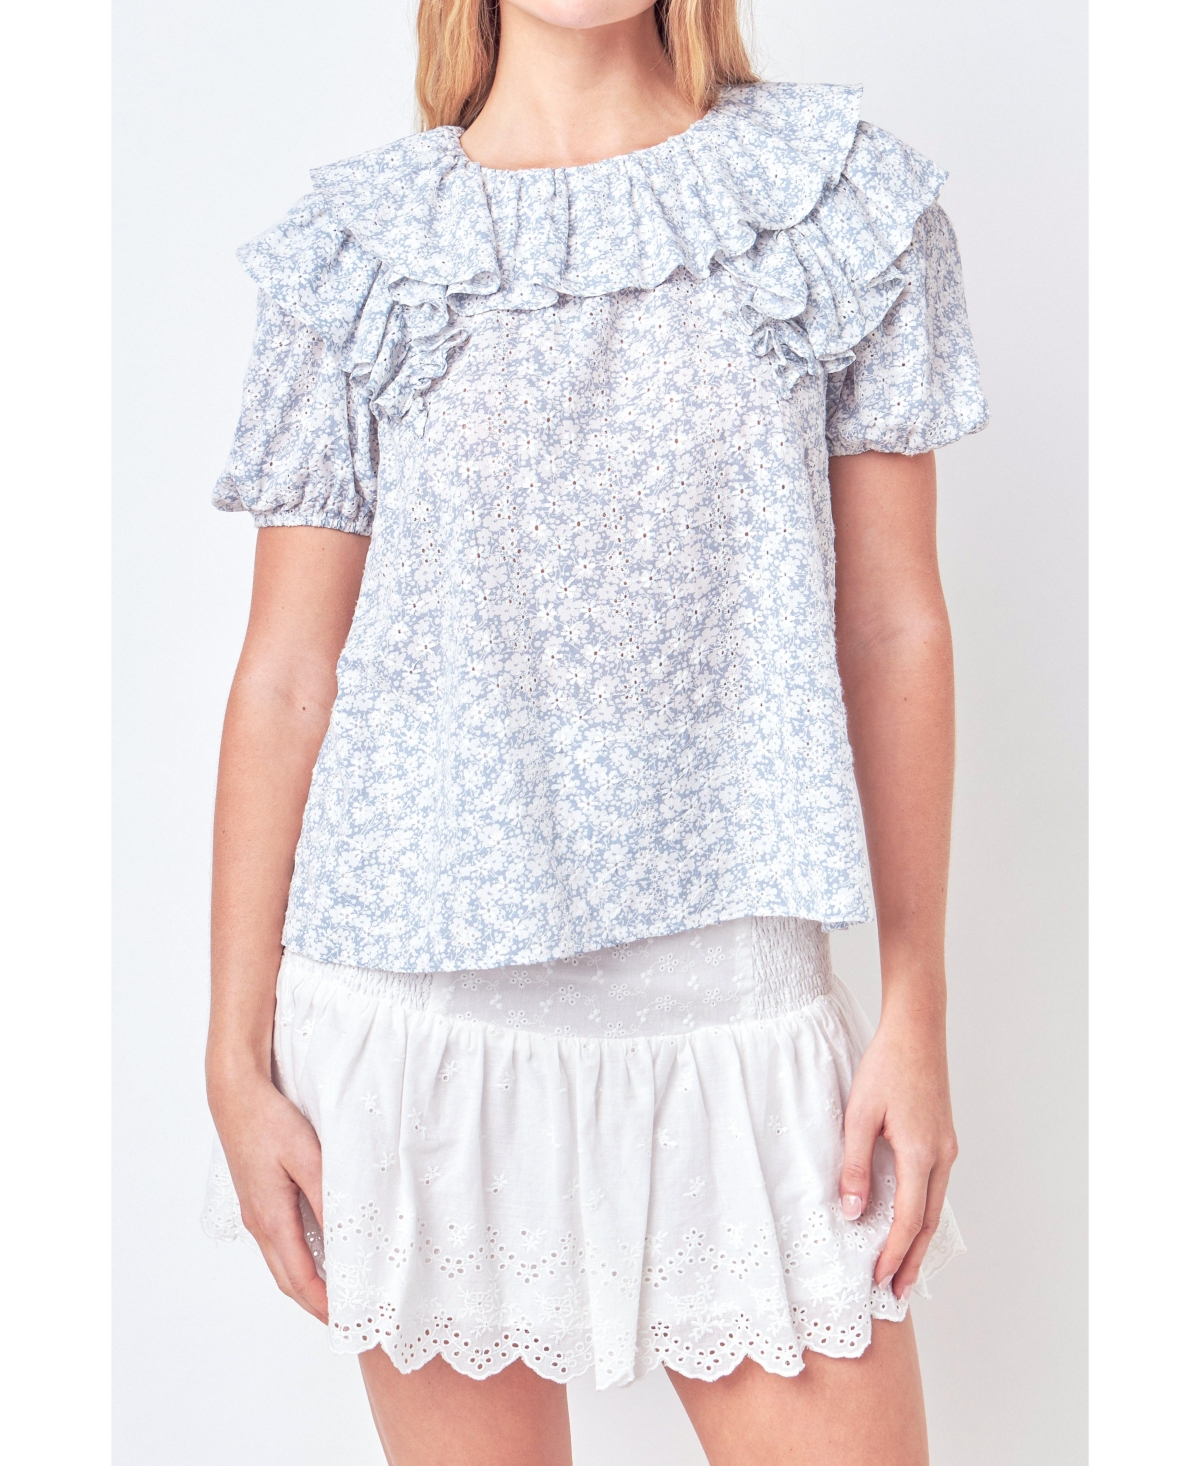 Women's Floral Print Ruffle Top with Puff Sleeves - Blue/white